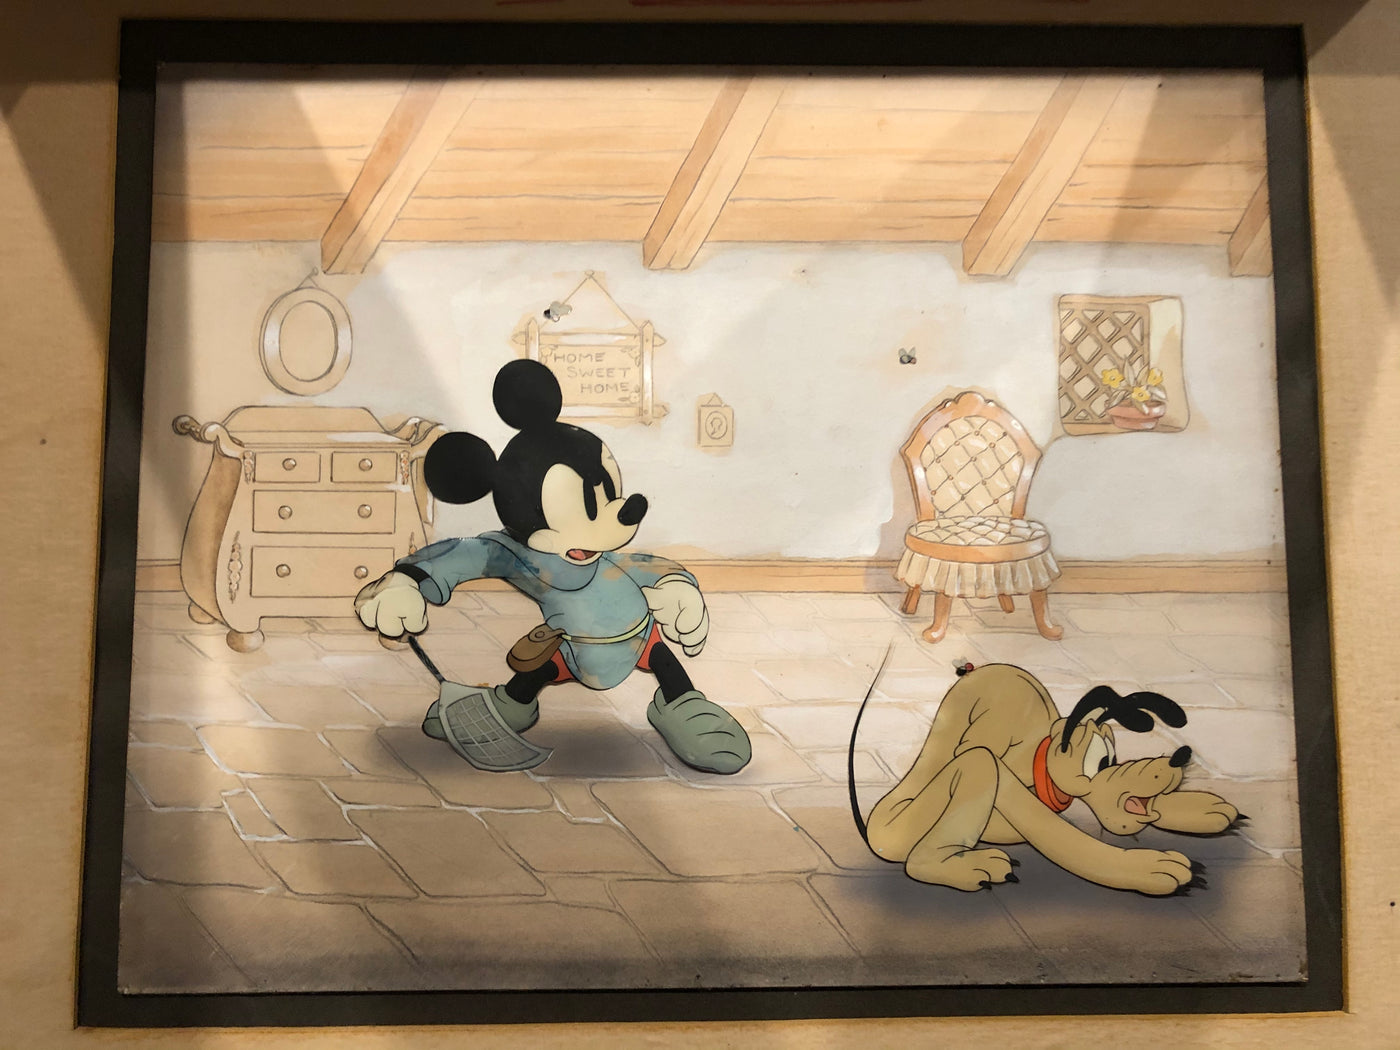 Original Walt Disney Production Cels on Production Background of Mickey Mouse and Pluto